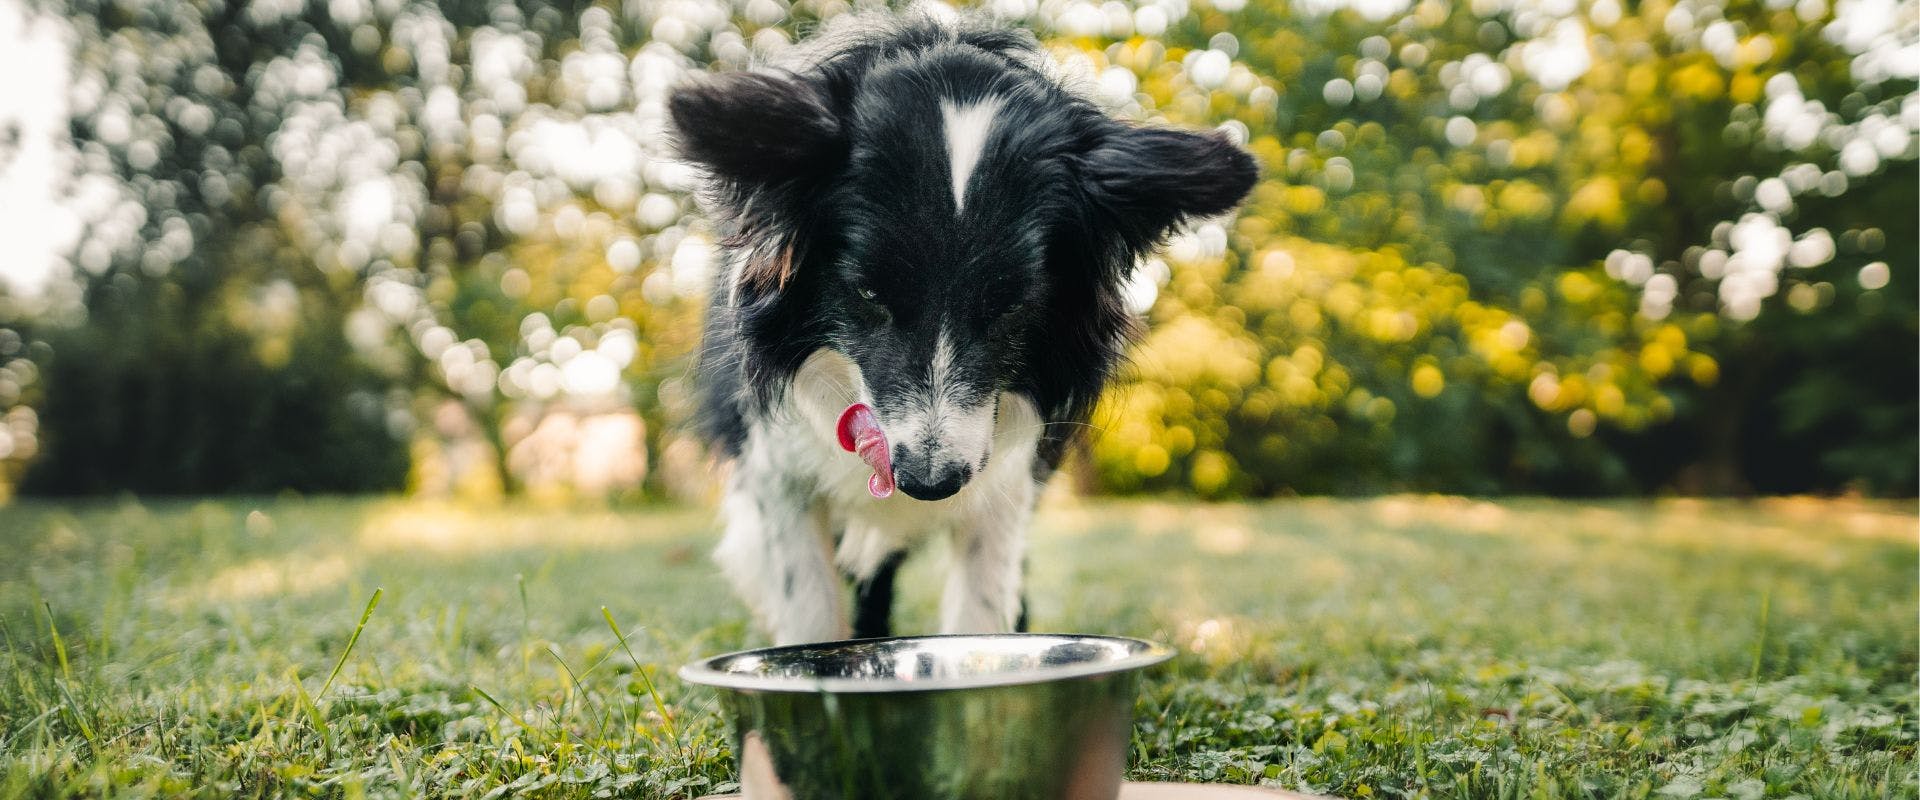 Border Collie eating from a metal bowl outside